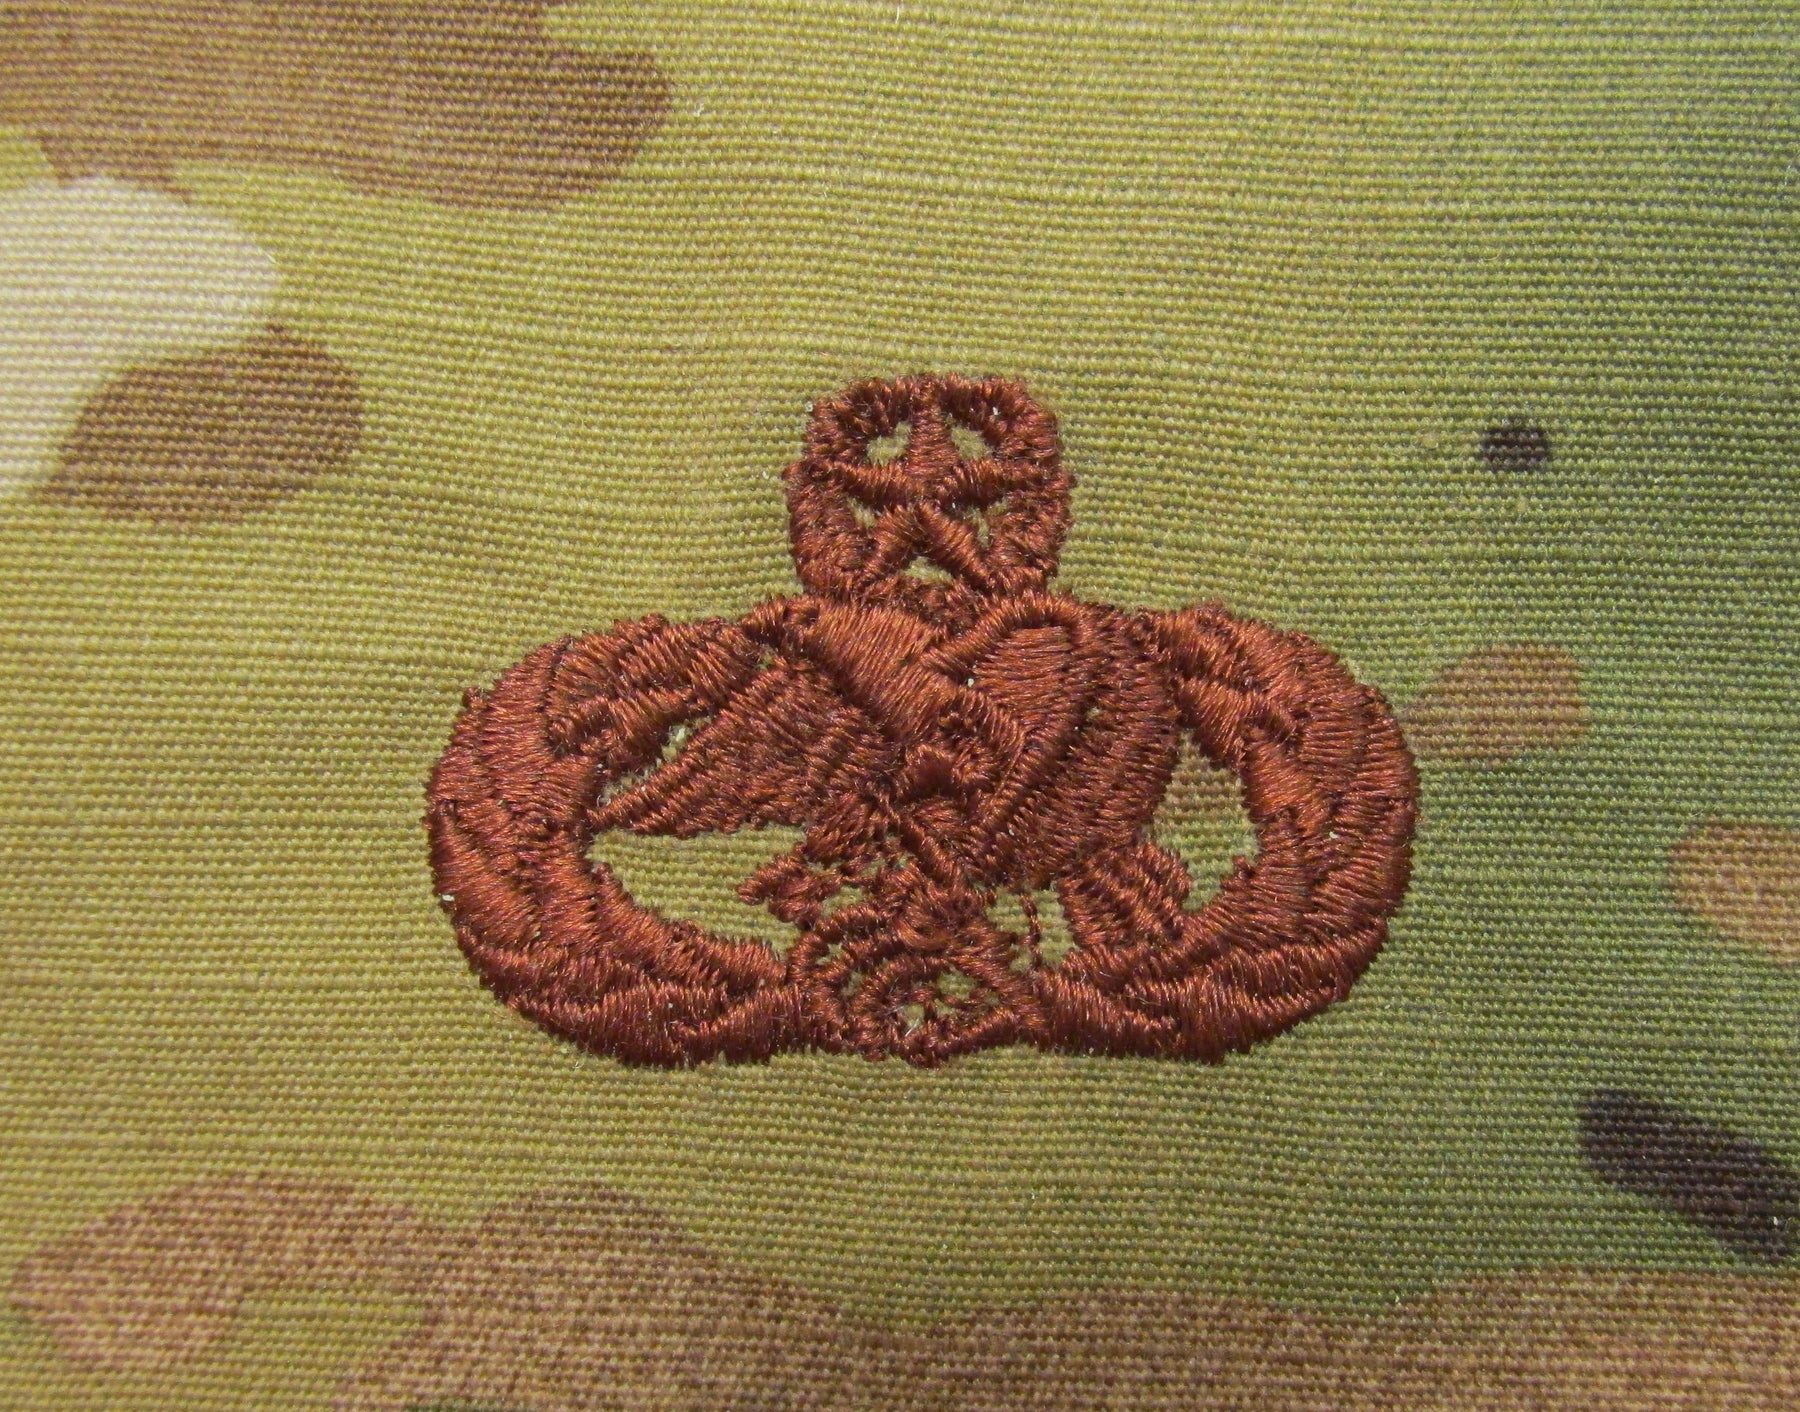 Logistics Readiness OCP Air Force Badge - SPICE BROWN